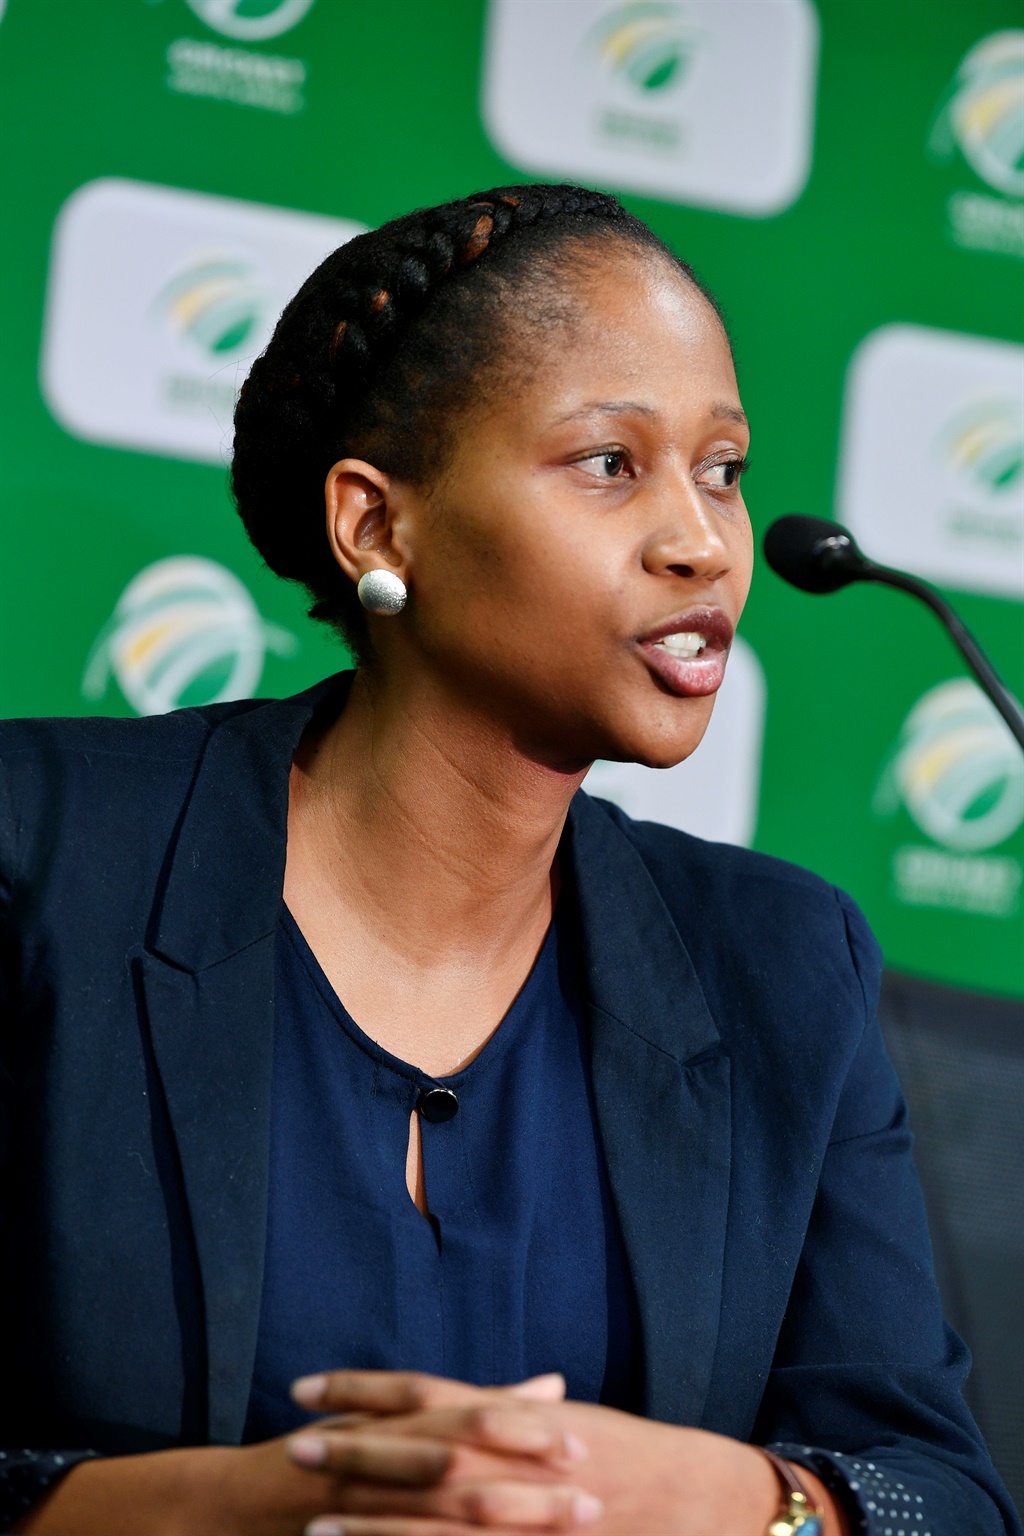 CSA Acting Chief Financial Officer, Ziyanda Nkuta during the CSA media briefing at CSA Head Office on April 12, 2019 in Johannesburg, South Africa. 